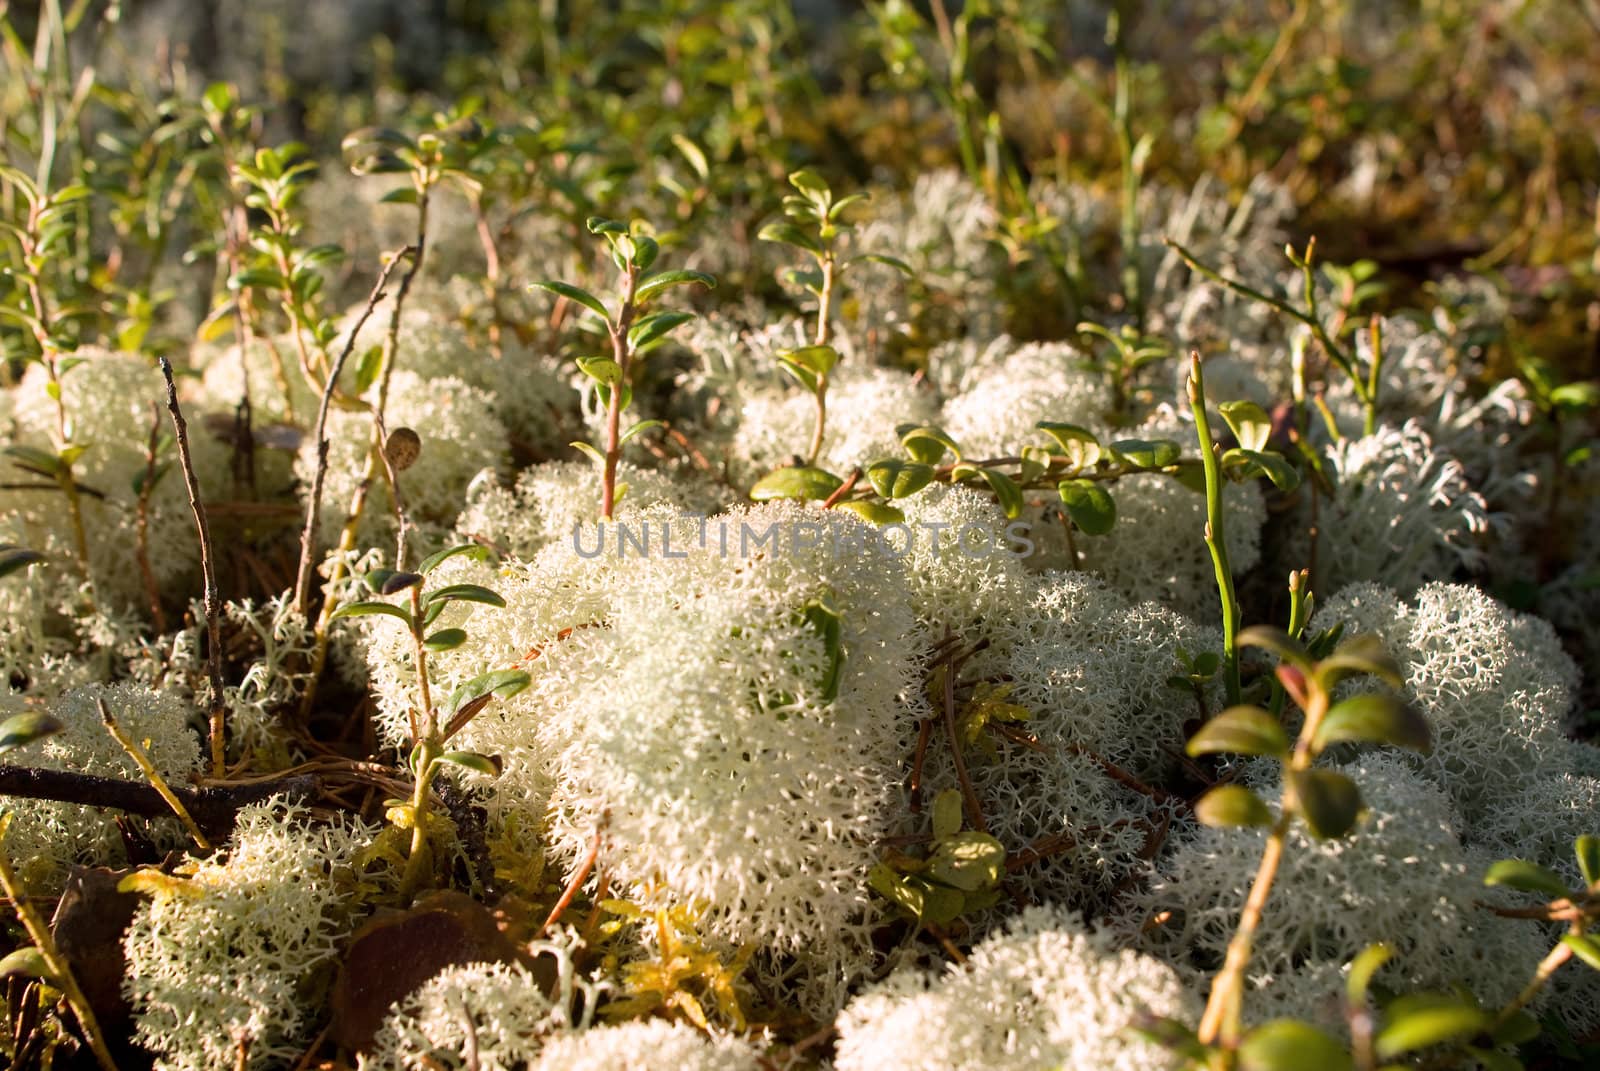 Lichen on a hummock in sunny day by BIG_TAU